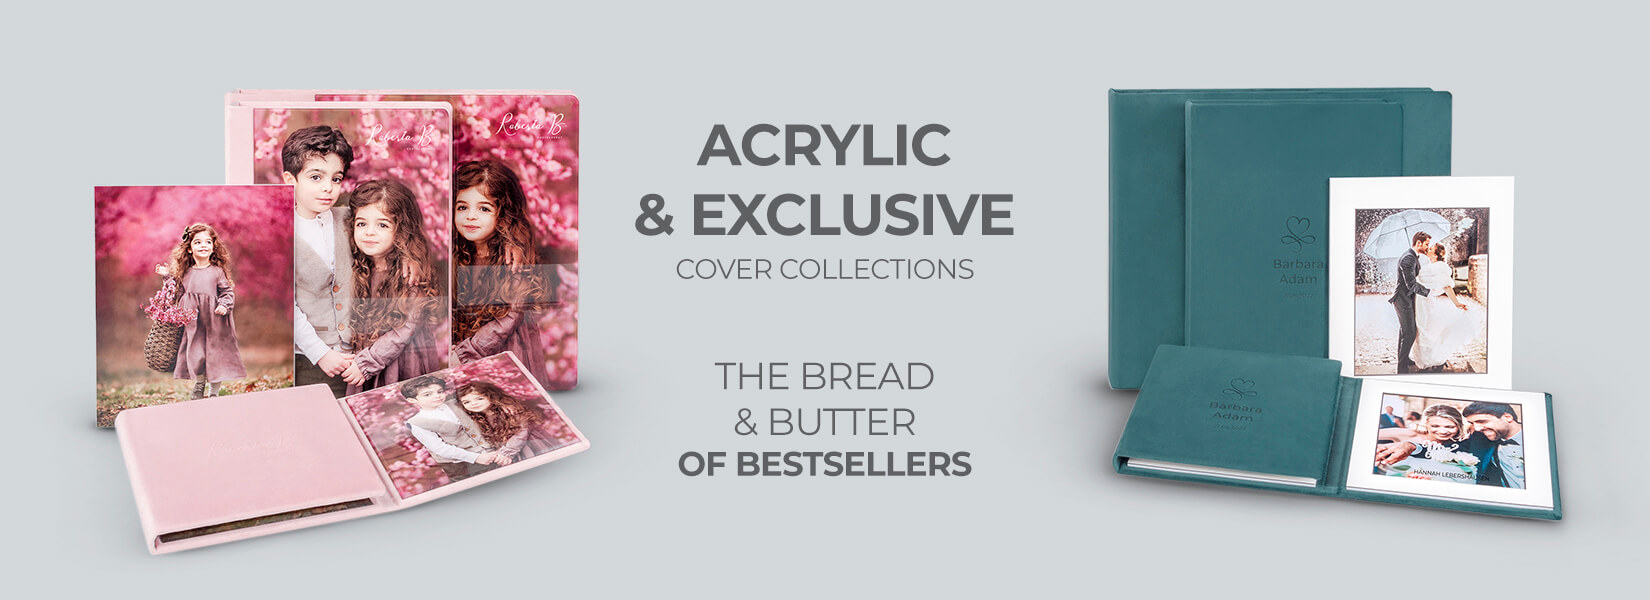 acrylic and exclusive bestsellers